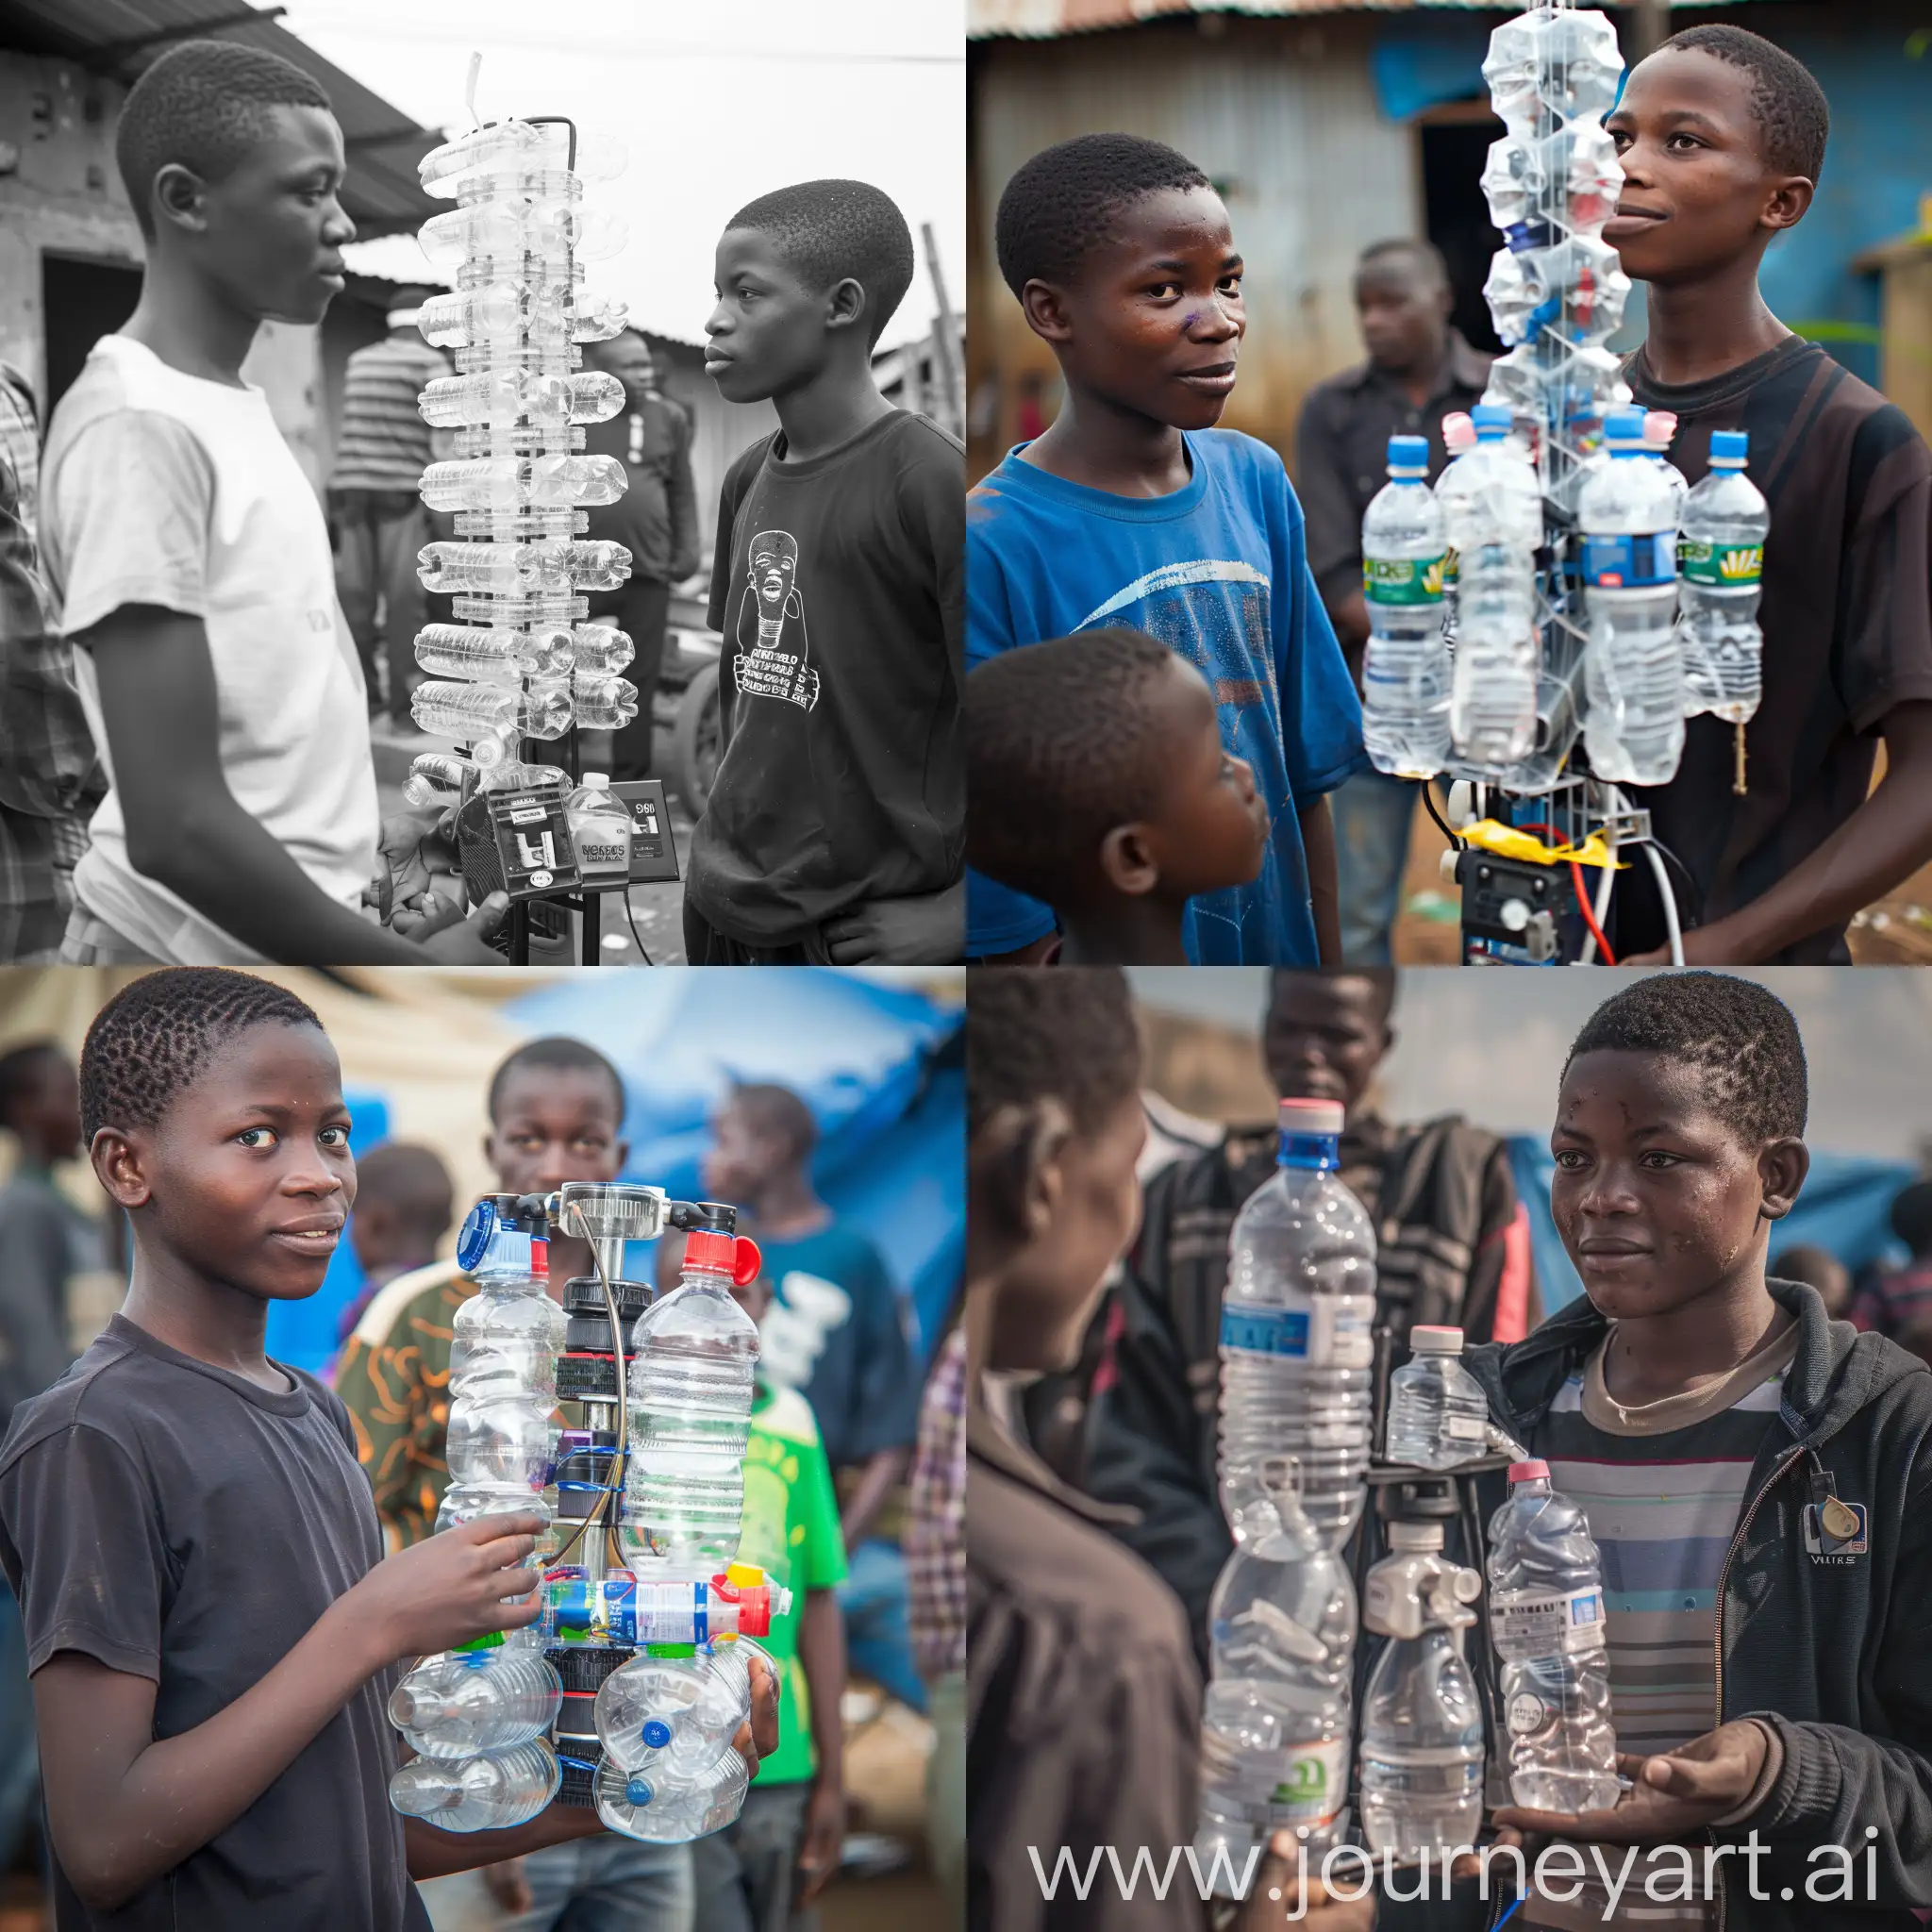 pass through the following image prompt      photo of a young adult African prodigy.  He is proudly showing the news crew his water purification system constructed from nothing but plastic bottles and recycled materials.  He is in a developing country. He is facing the camera/ viewer ISO 800, F1/8, 10mm lens